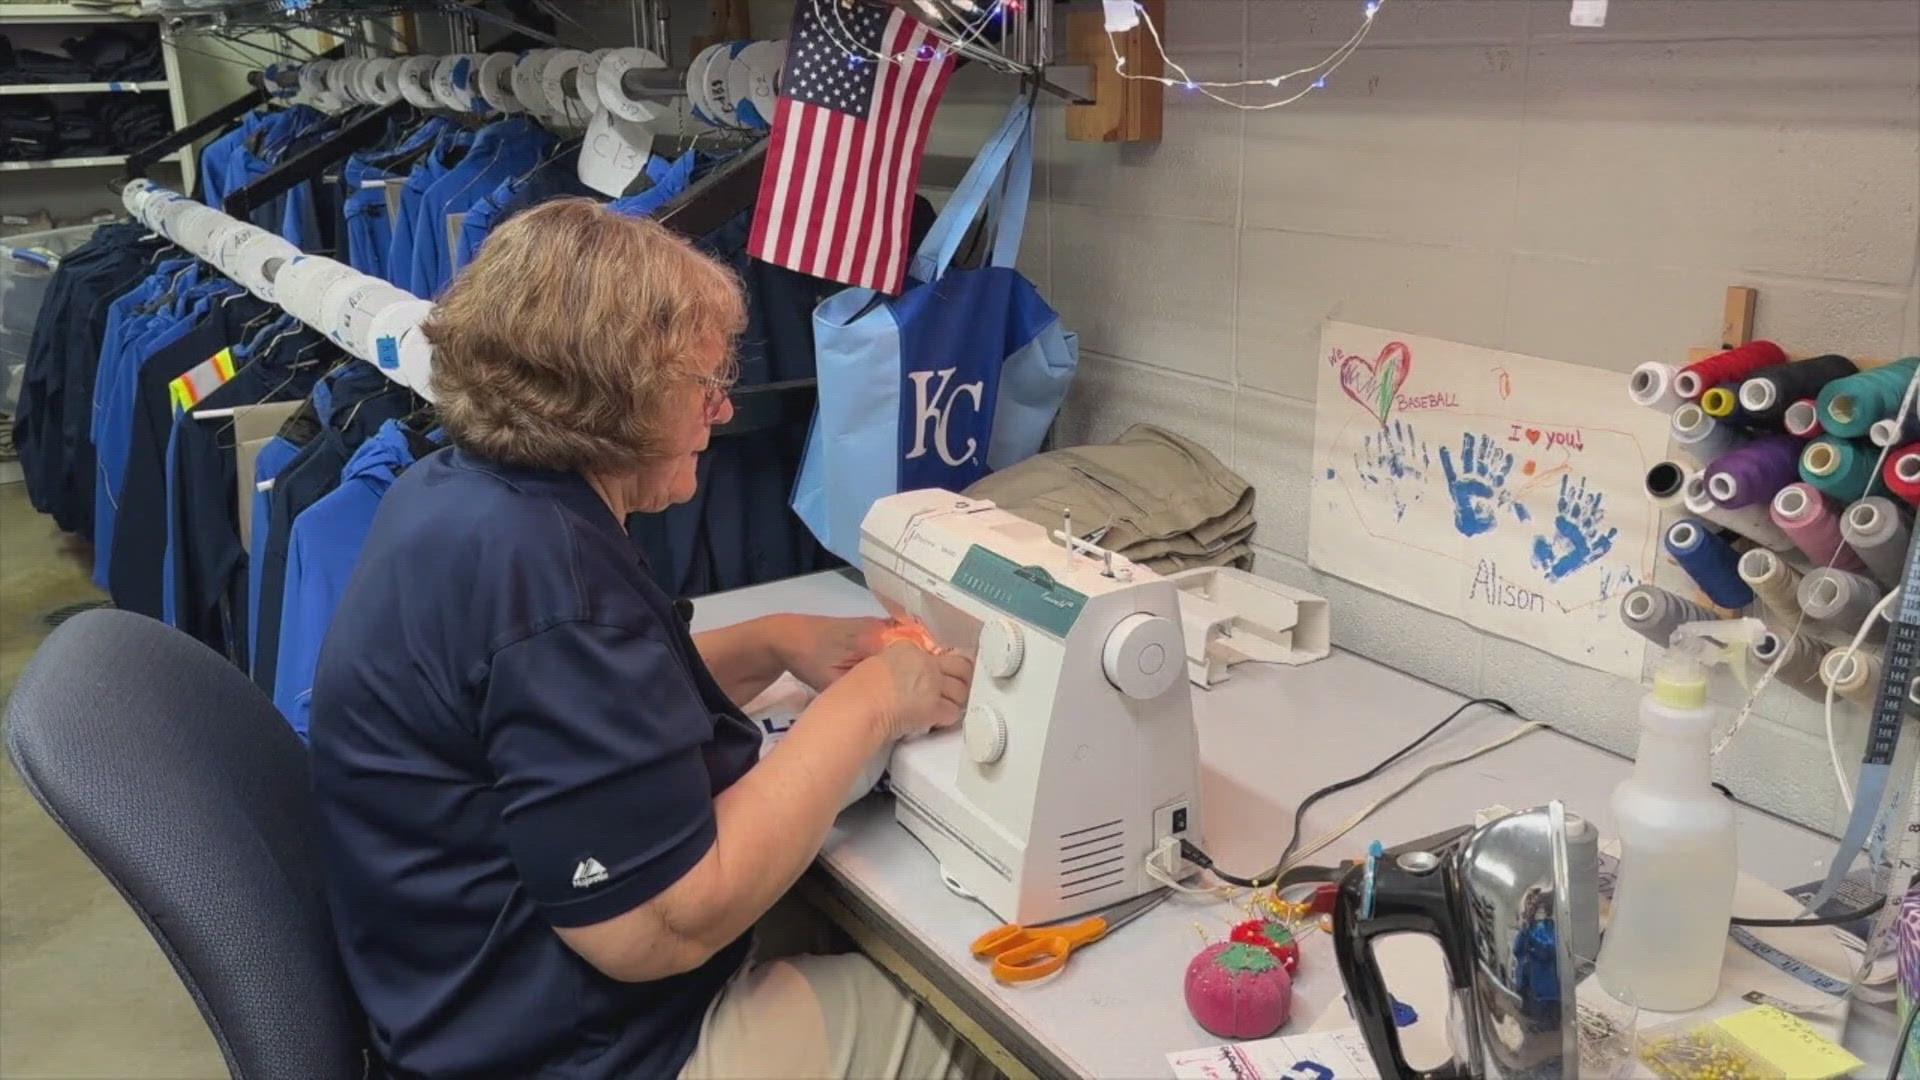 For nearly 30 years, Beverly Vratny has worked underneath Kauffman Stadium sewing and ironing away.